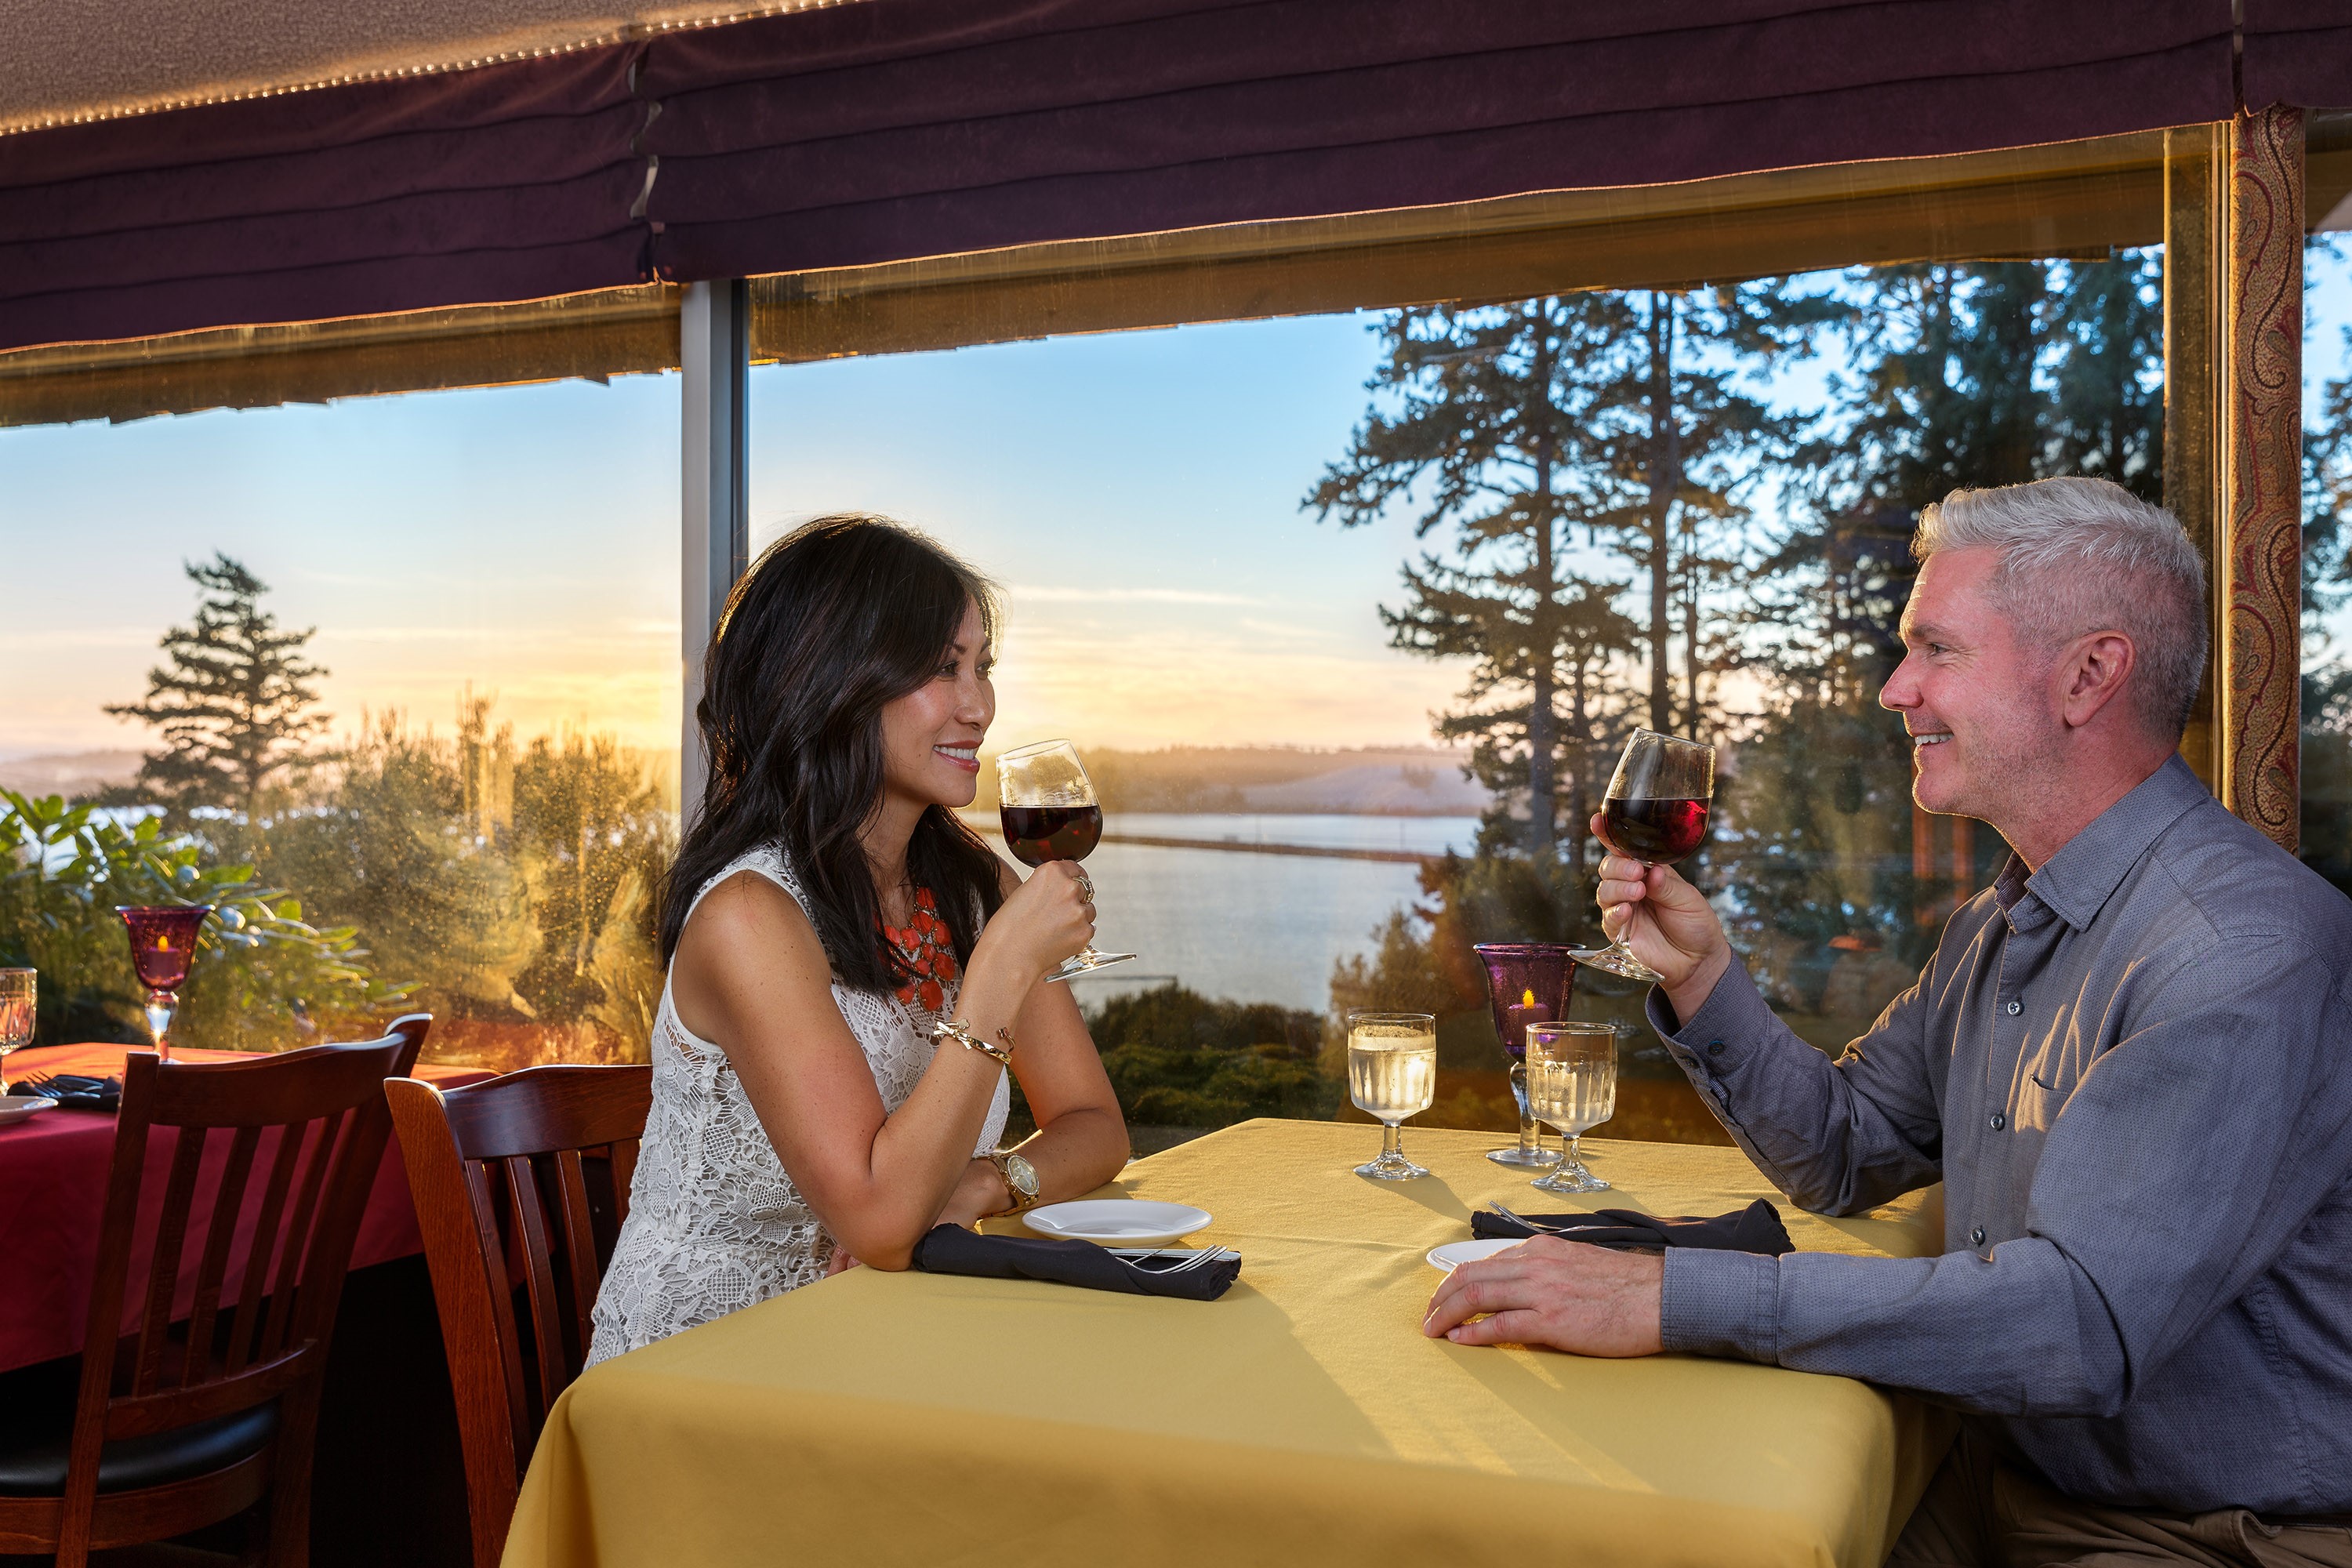 A couple enjoy a glass of wine in a restaurant with a window that looks out over a scenic coastal area.